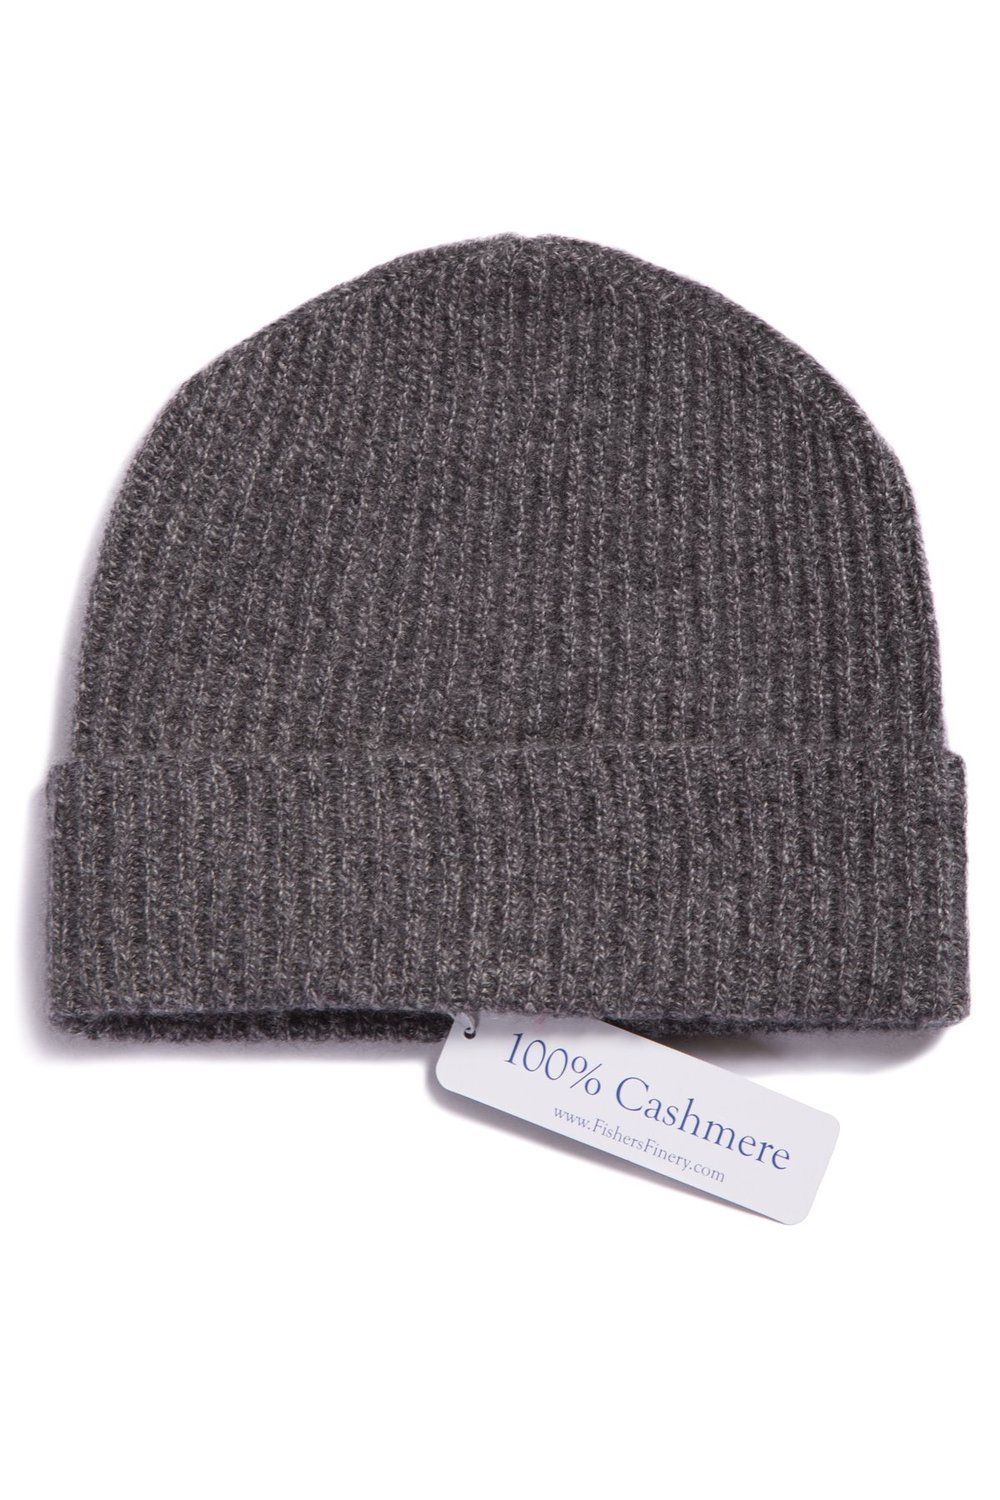 Fishers Finery 100% Pure Cashmere Ribbed Hat